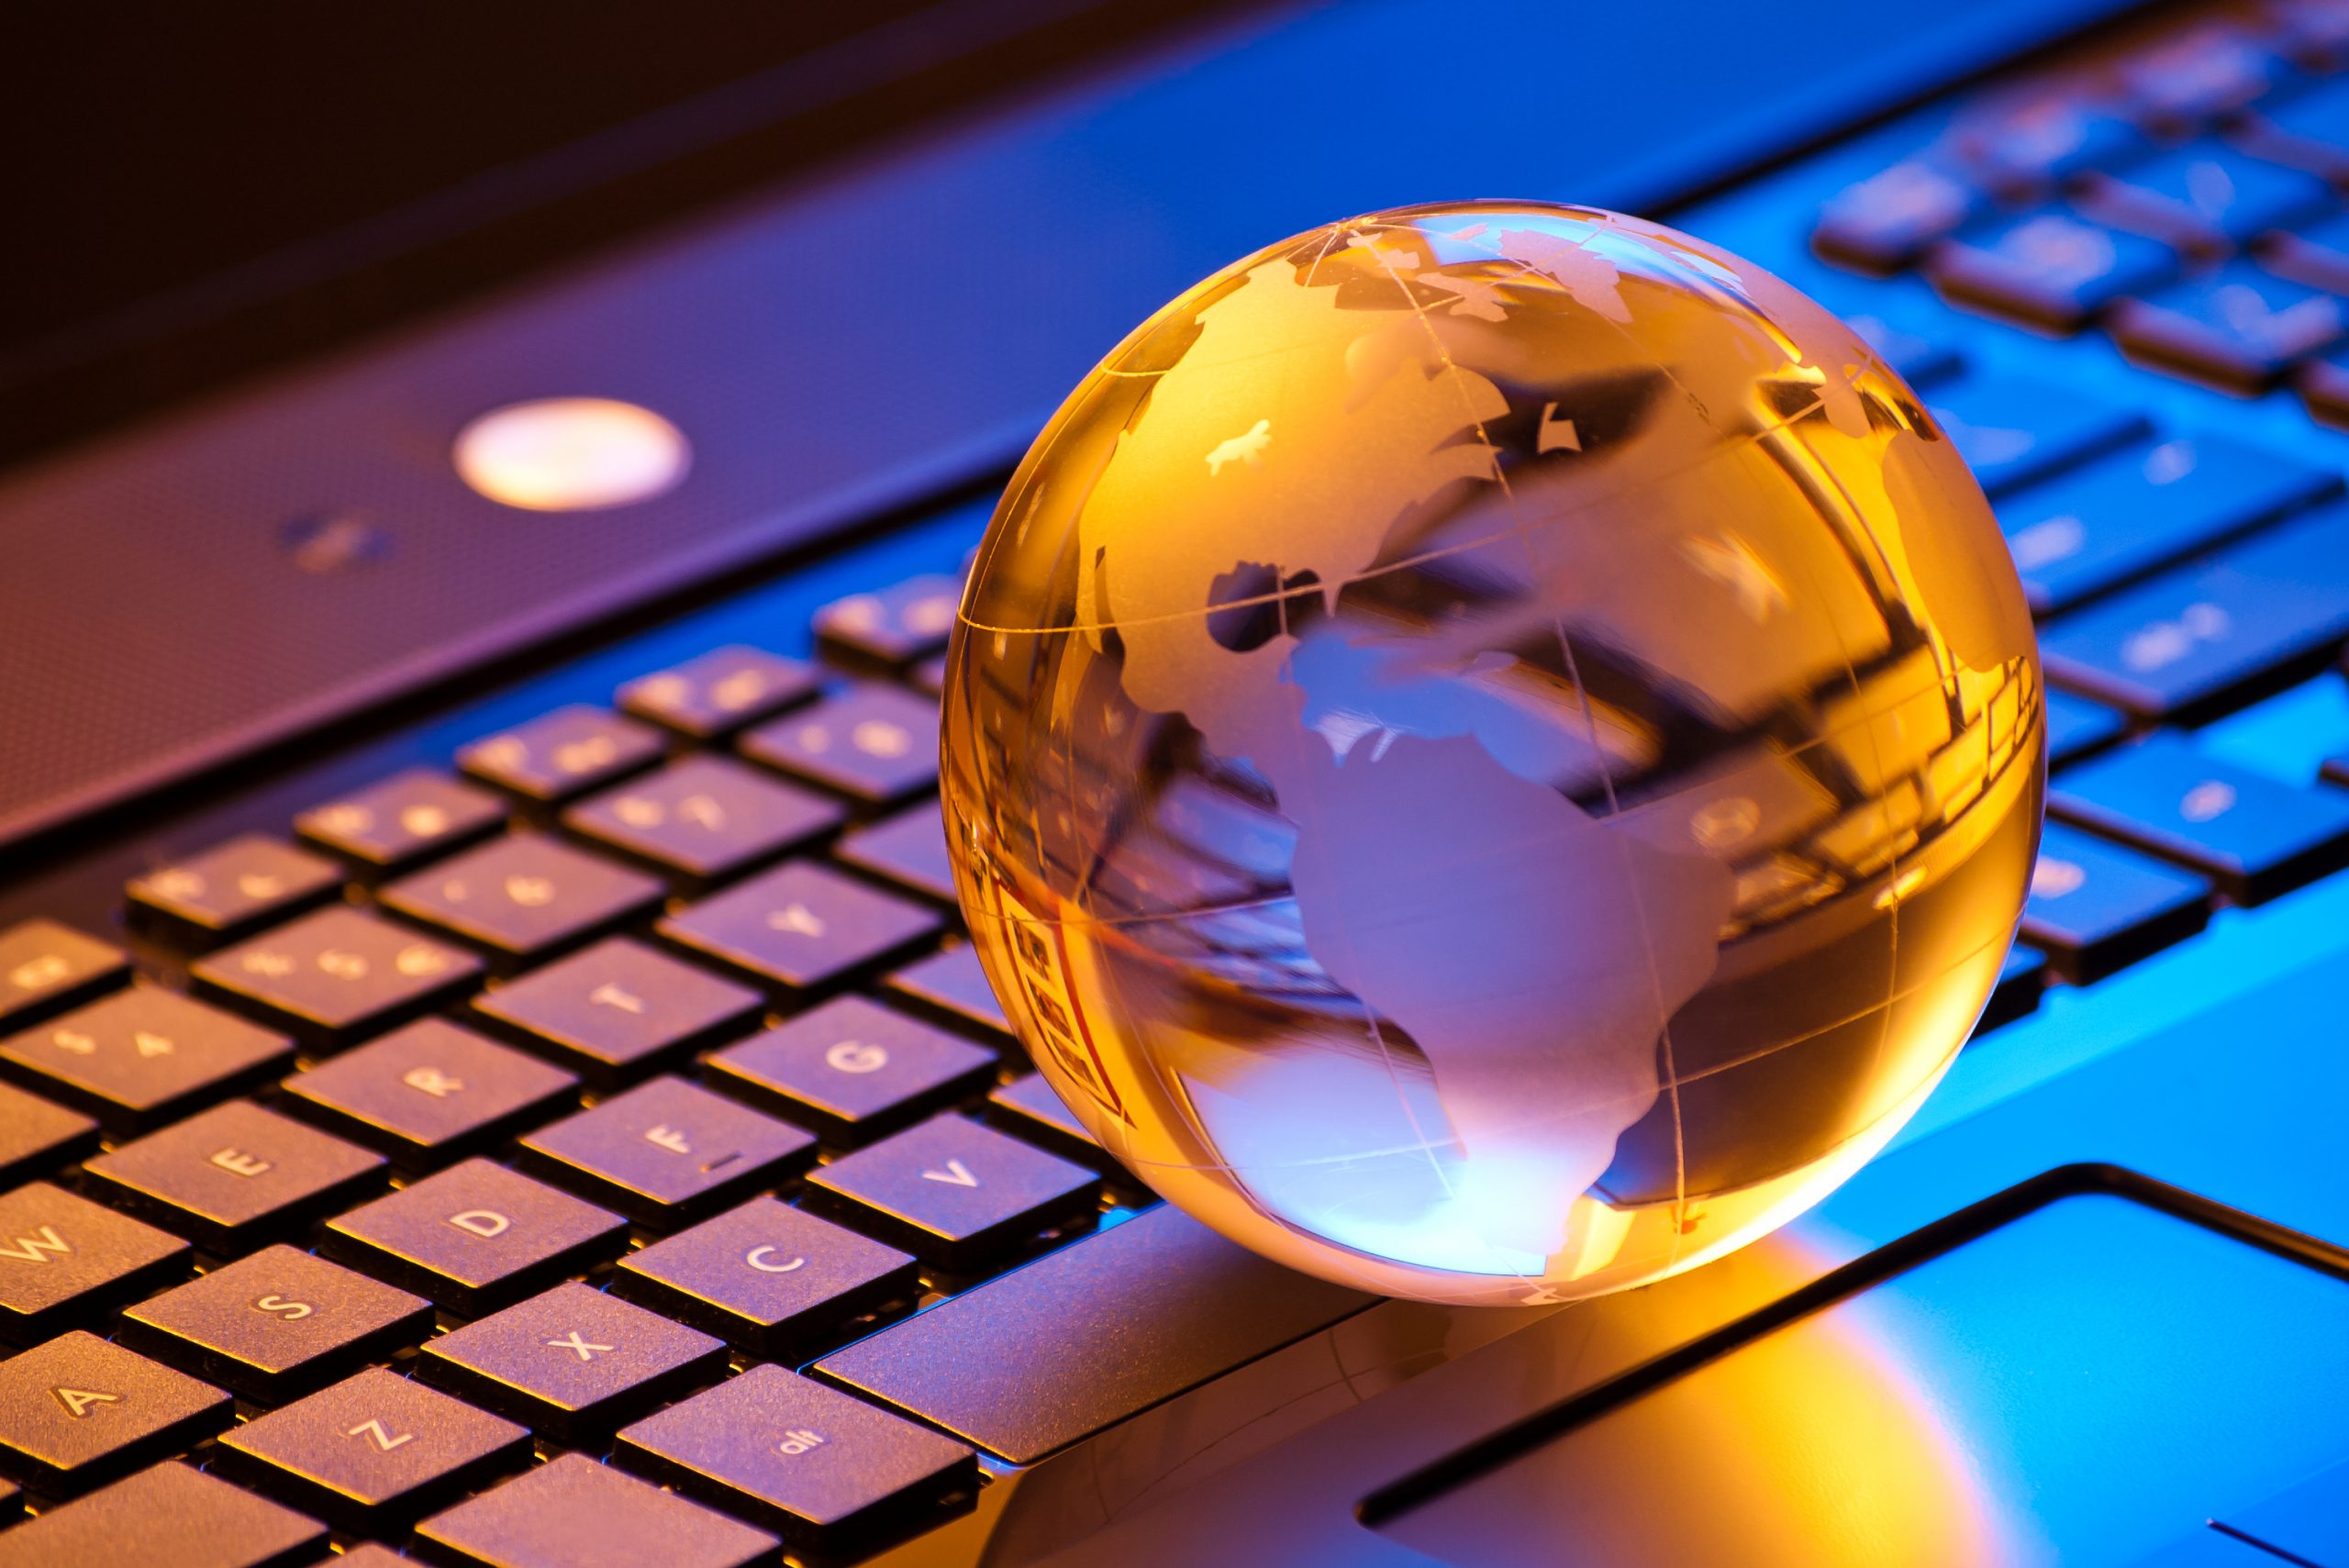 global computer business concept with small globe on laptop keyboard in mixed light